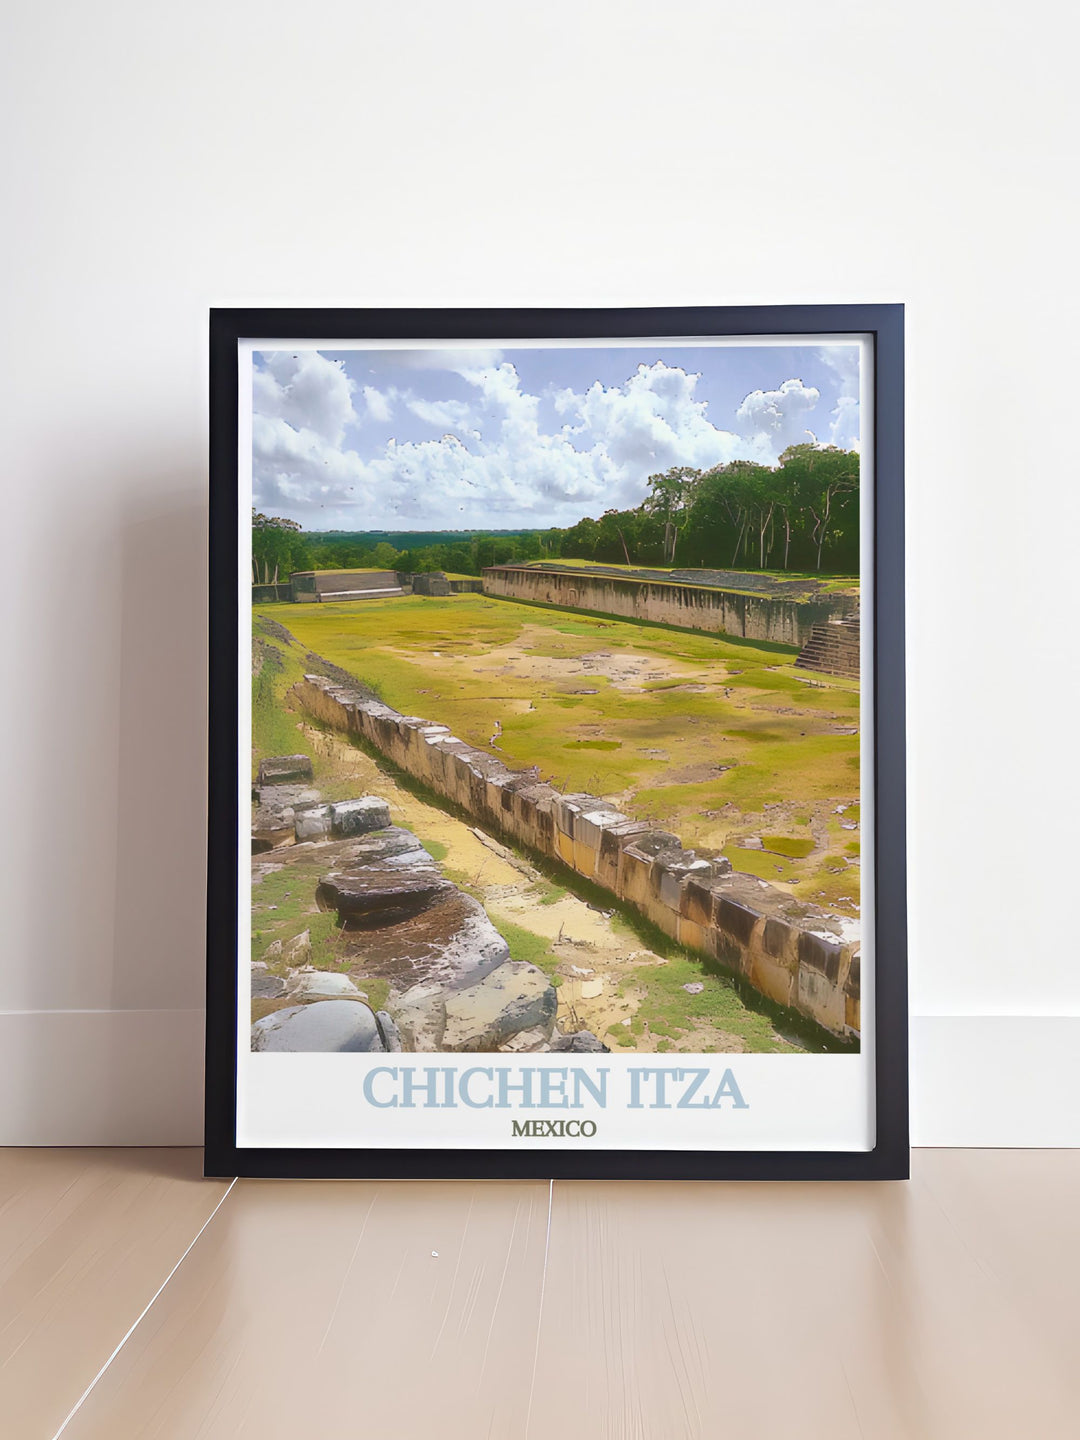 The ancient splendor of Chichen Itza is showcased in this travel print, highlighting the unique architecture and cultural significance of the site. This poster artfully depicts the grandeur of the Great Ball Court, offering a perfect addition to any wall.